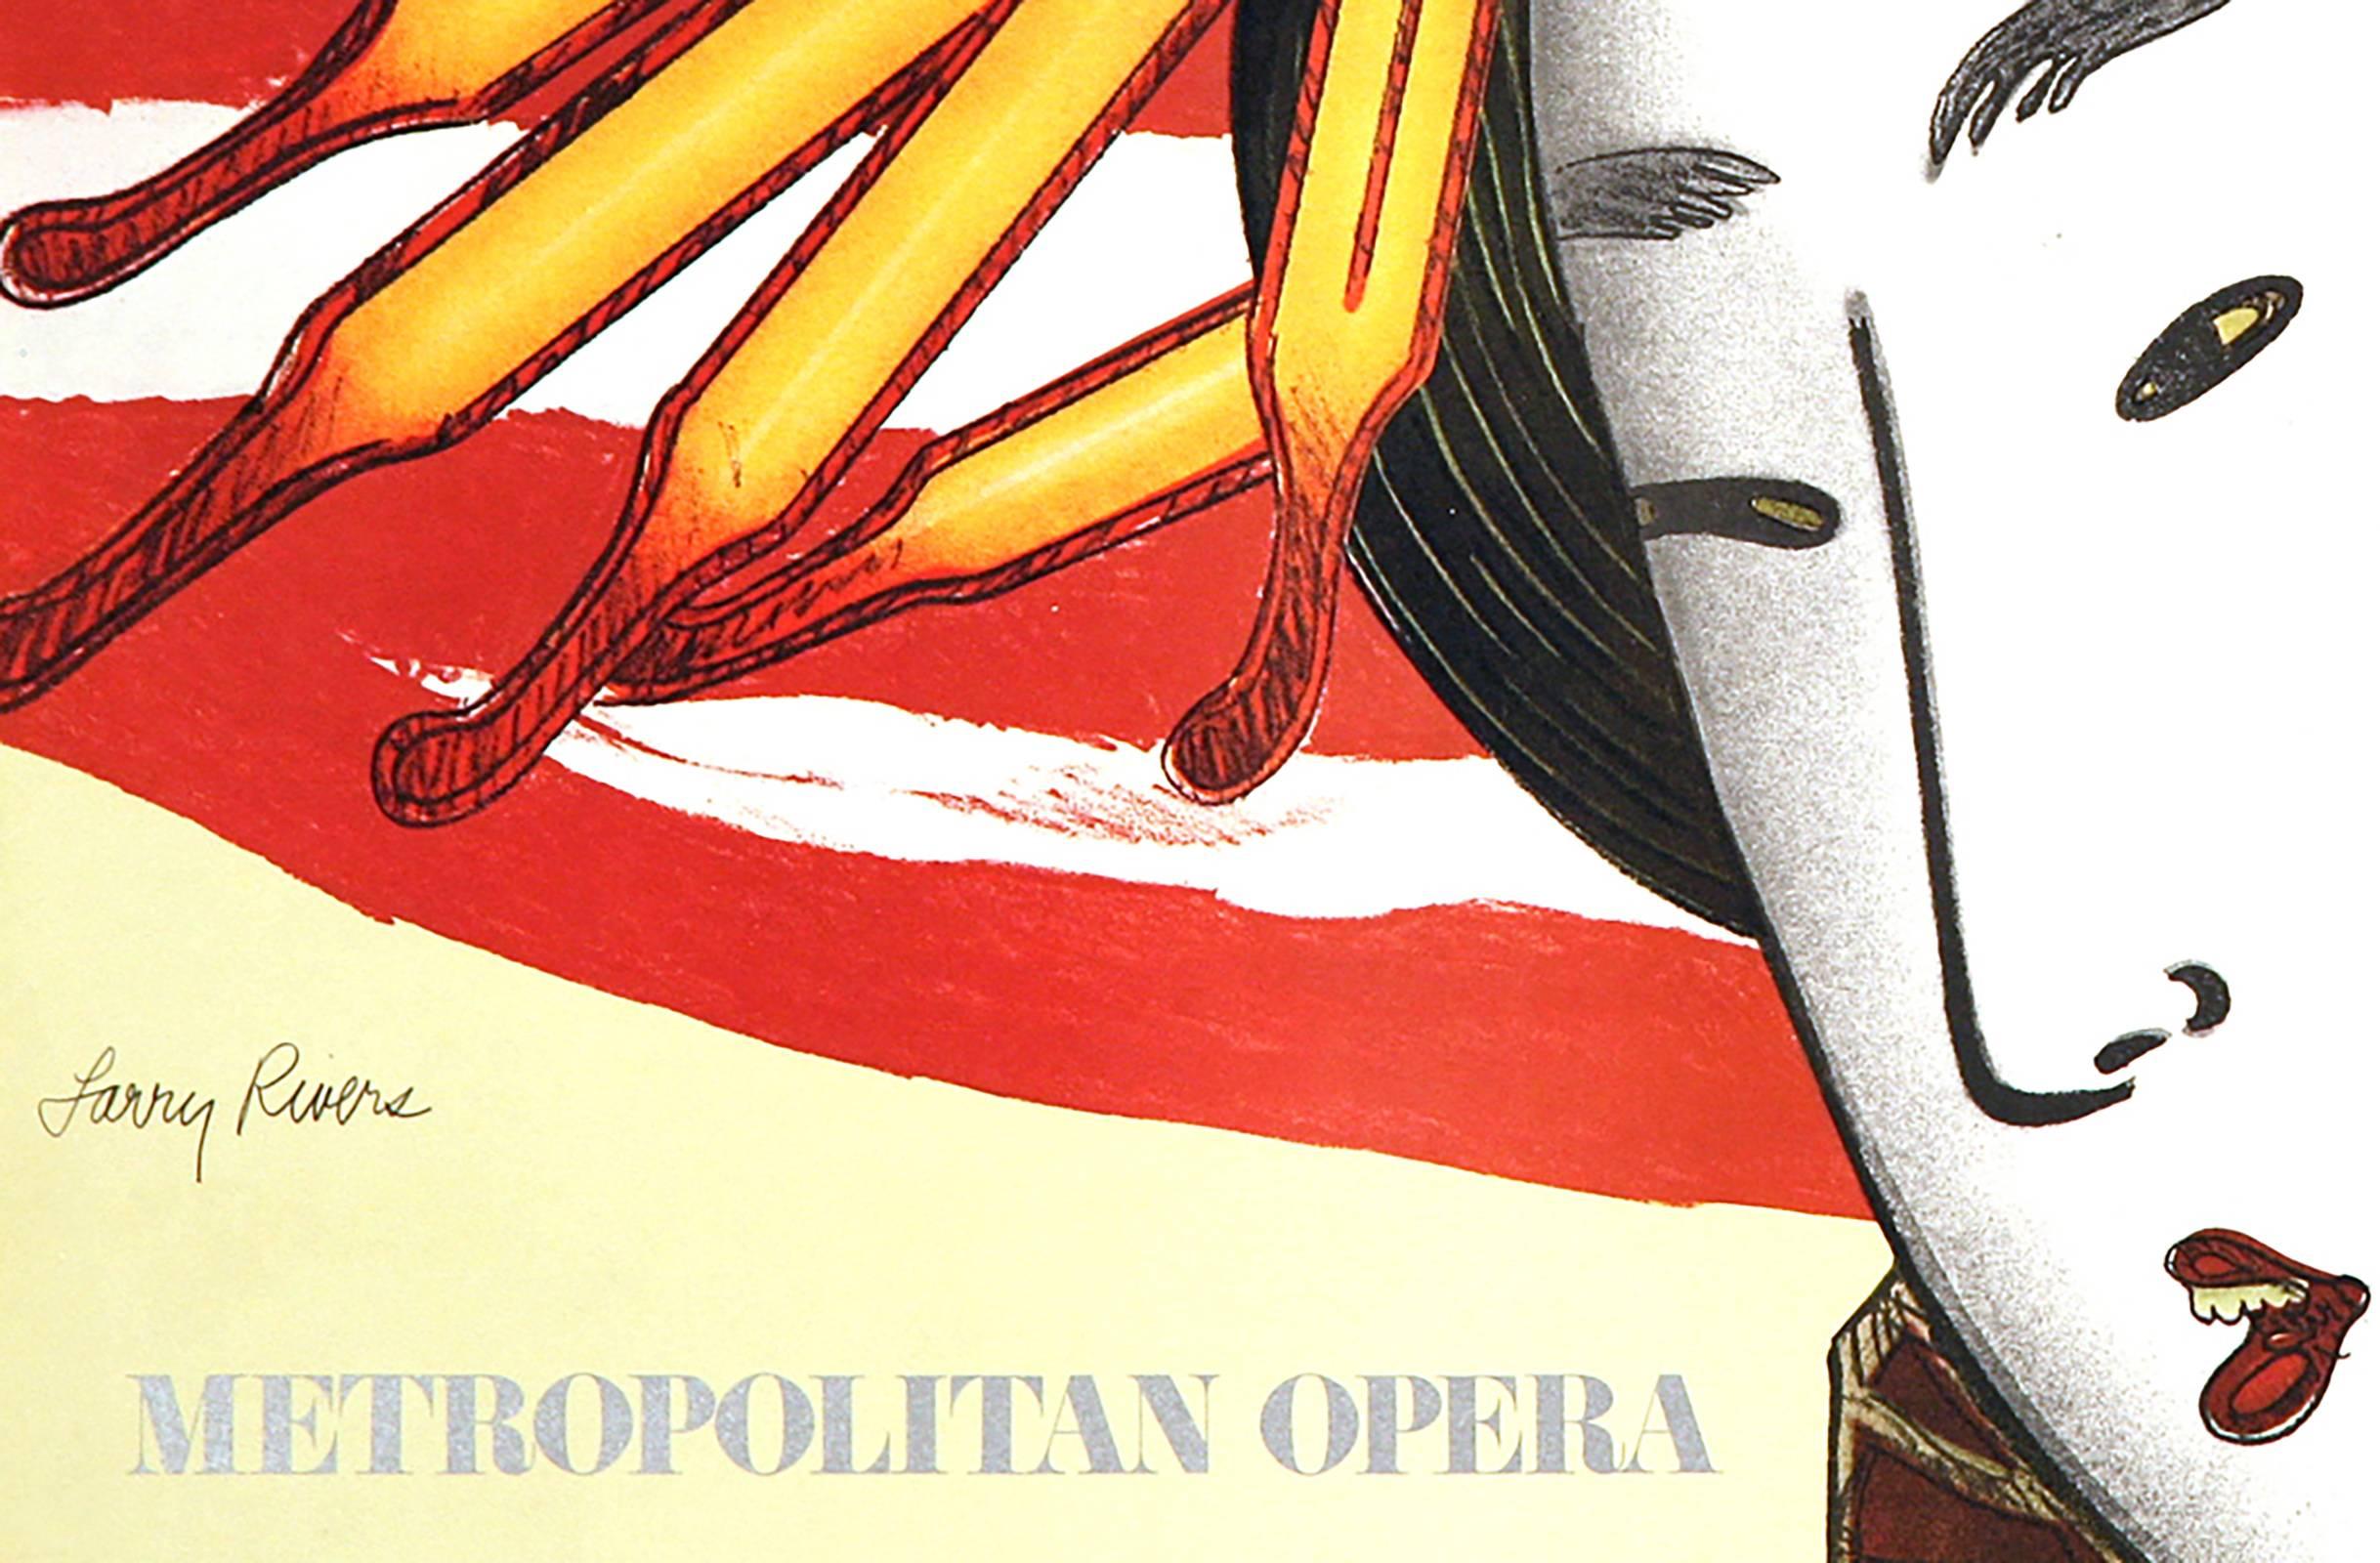 Madama Butterfly Met Opera Poster - Print by Larry Rivers